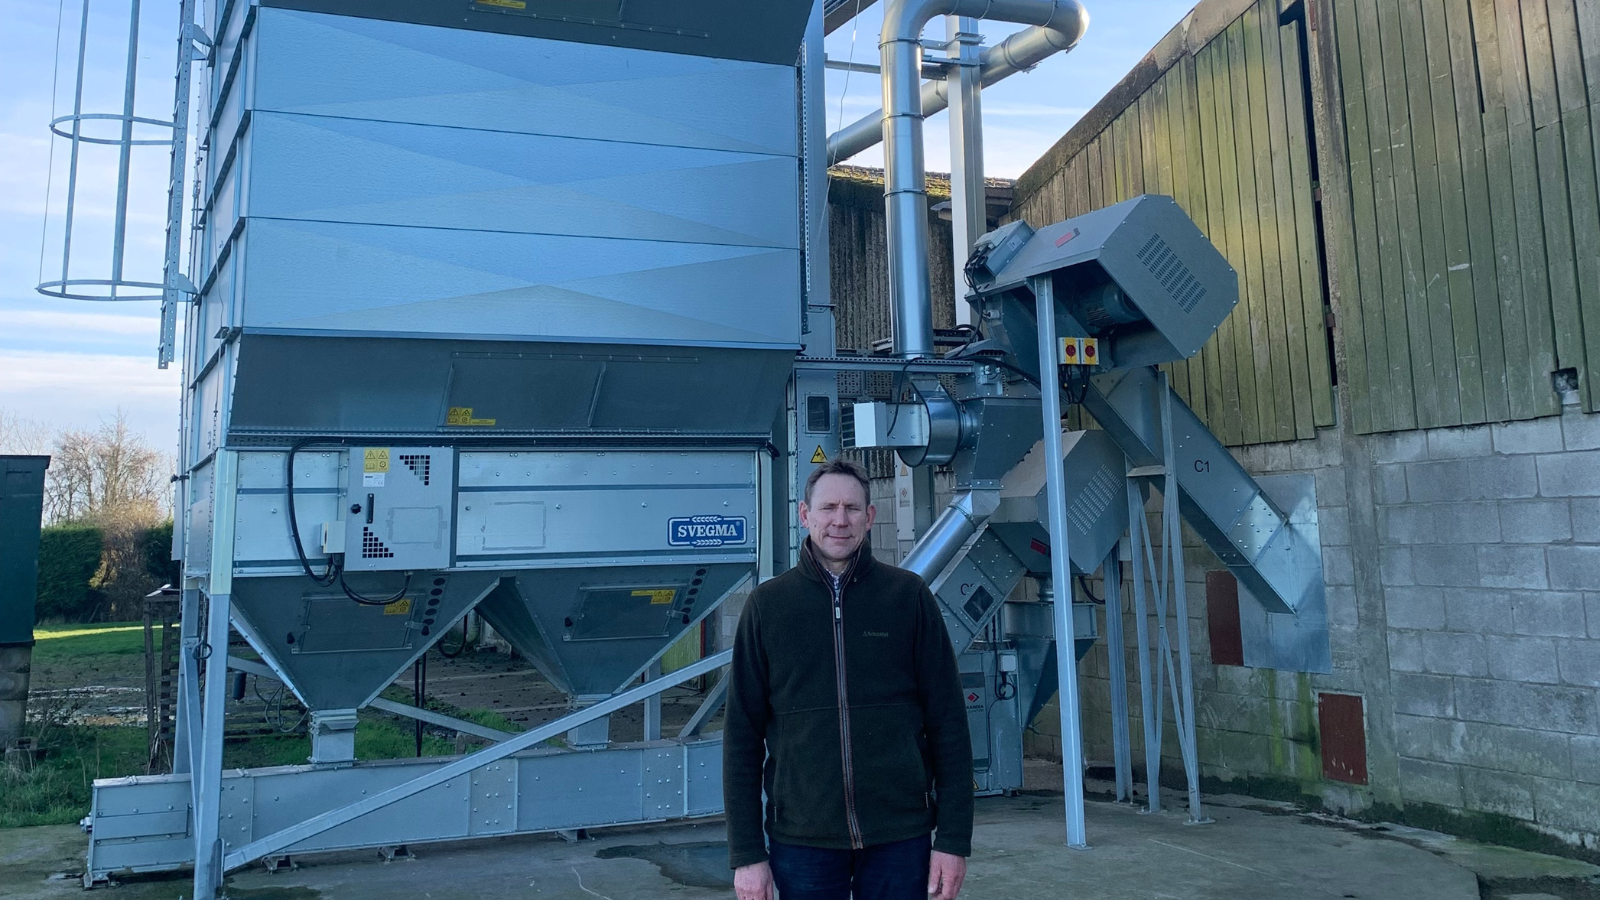 BDC Systems and McArthur Agriculture continue to deliver cost-effective, future-proofed grain drying and handling solutions to improve productivity and efficiency